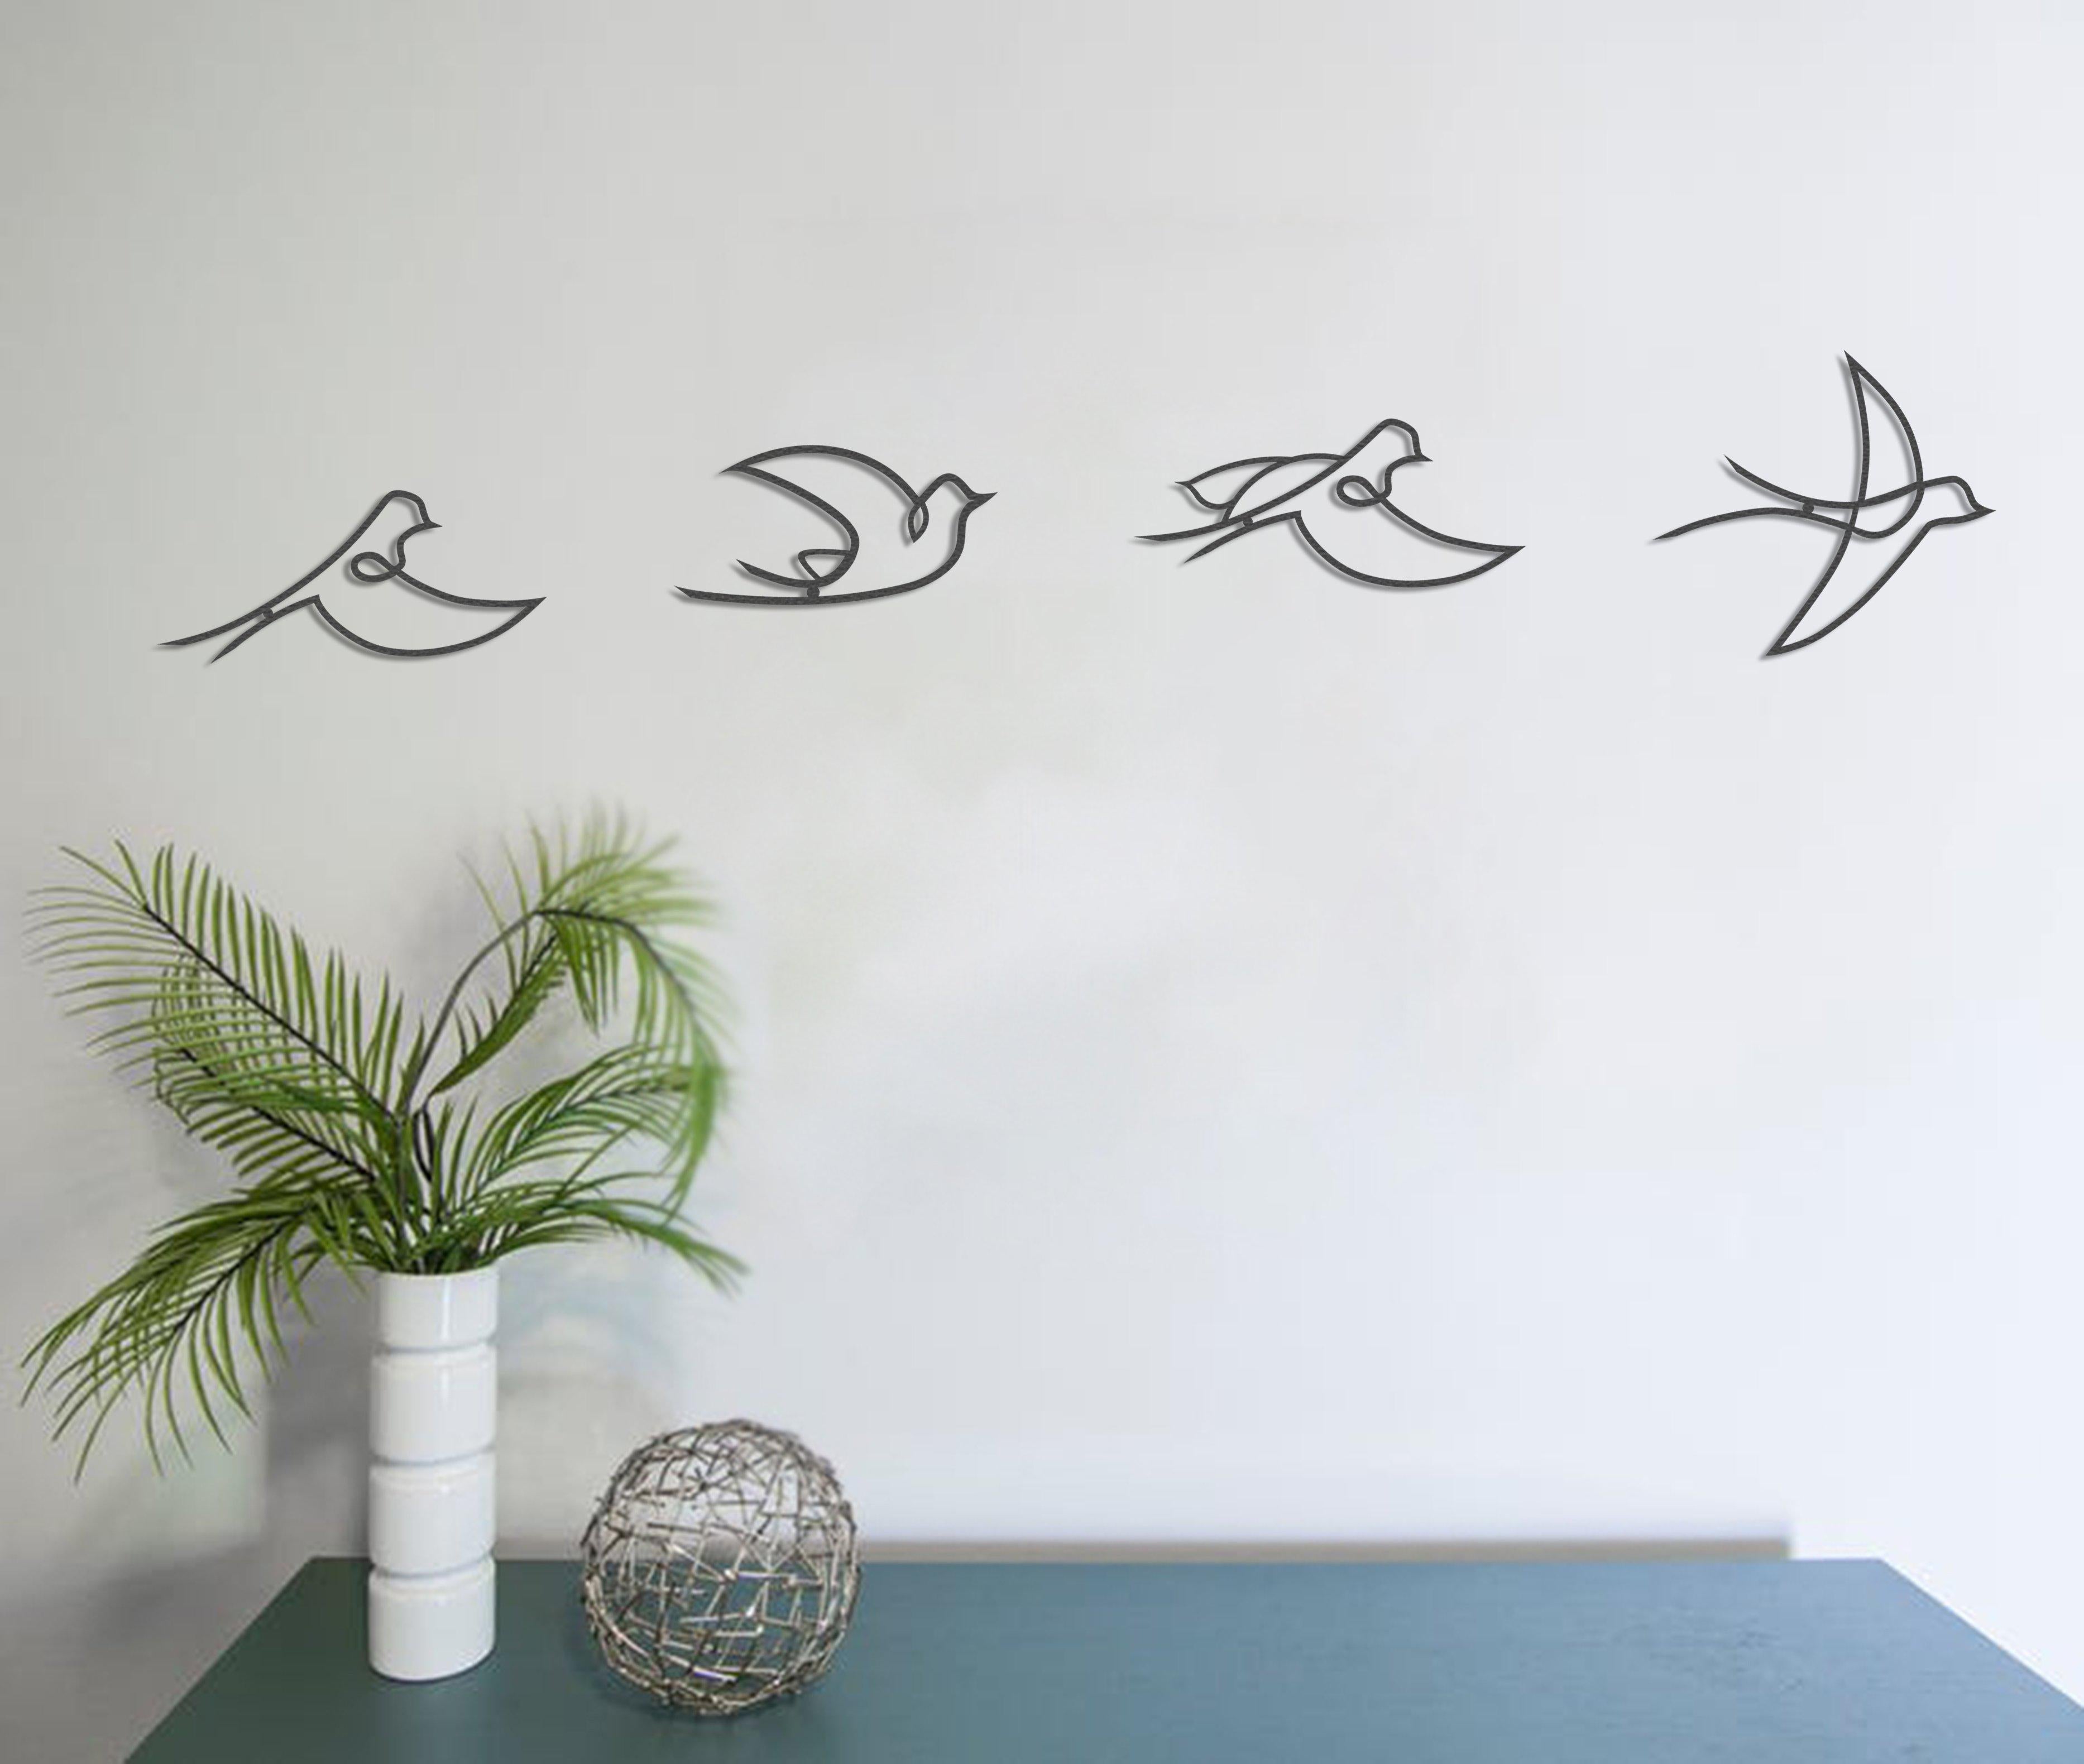 | Wall Wall archtwain Art Set – Flying Sign Birds Decor Archtwain Metal Office Home